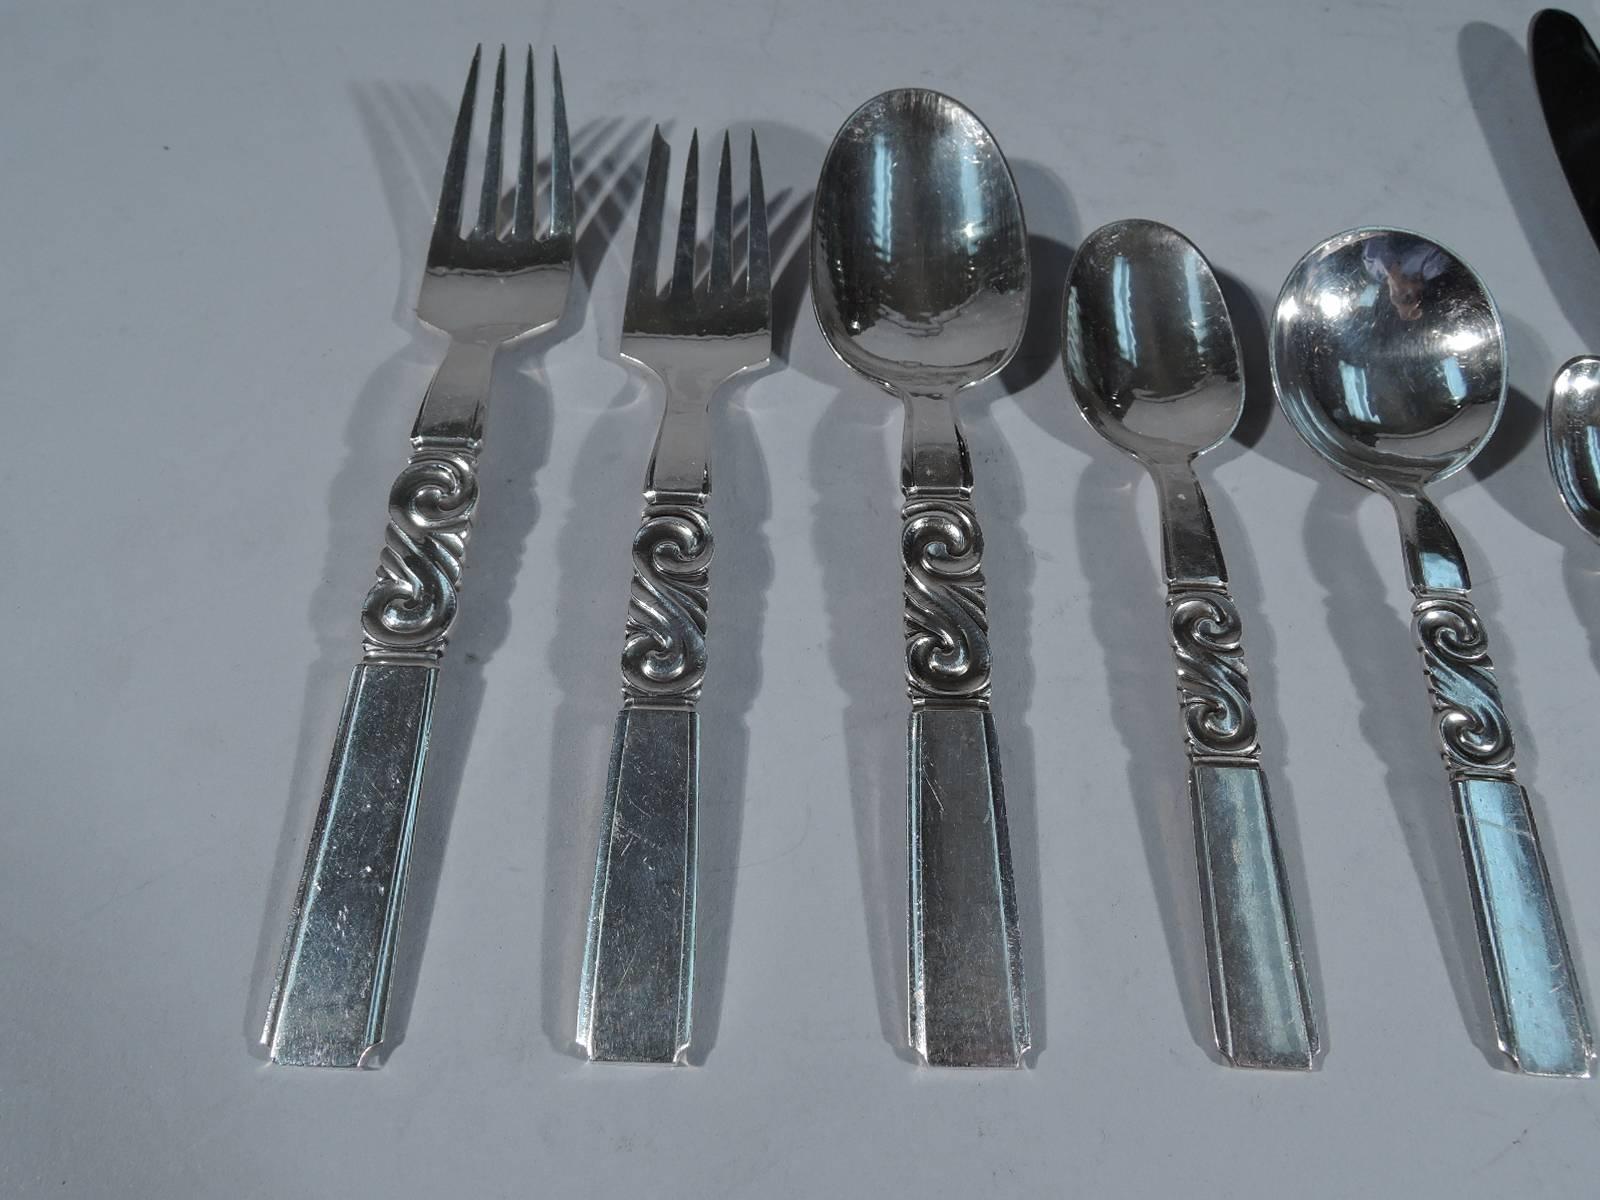 Sterling silver dinner service for 12 in Scroll pattern. Made by Georg Jensen in Copenhagen. This service comprises 90 pieces (all dimensions in inches): Forks: 12 dinner forks (7 1/8) and 12 salad forks (6 1/4); Spoons: Six dessert/soup spoons (6